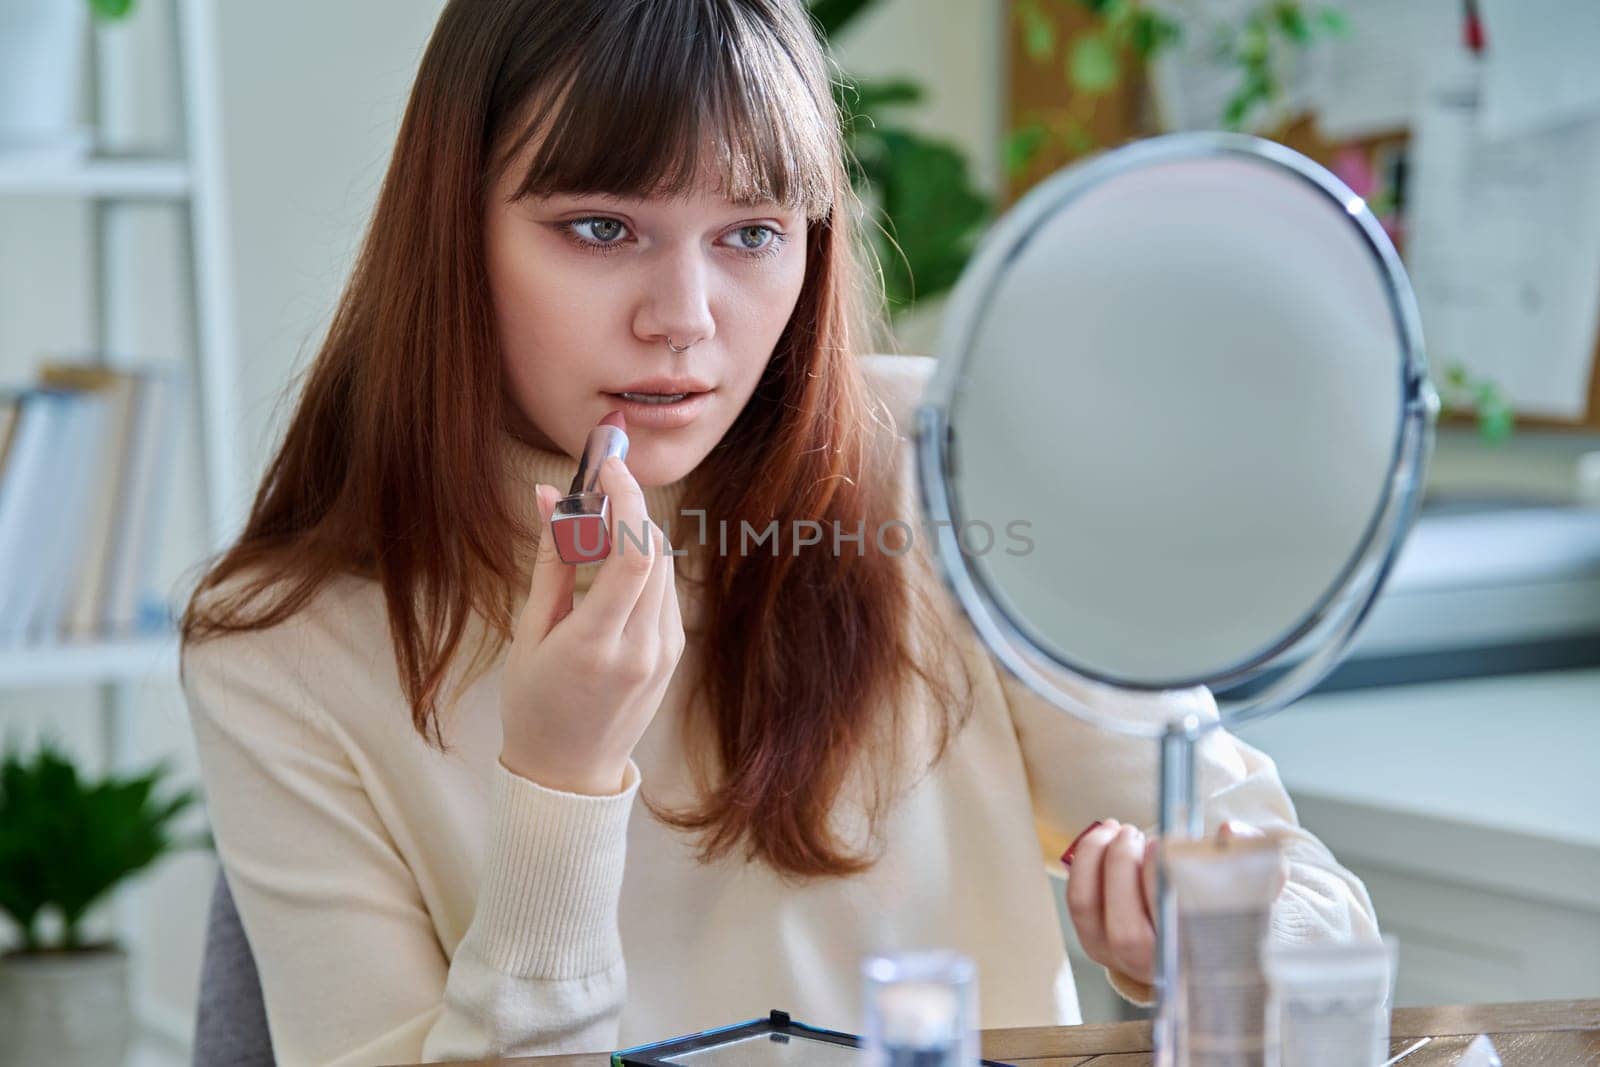 Young woman with cosmetic products on table, doing makeup looking in mirror at home, painting lips with lipstick. Cosmetics, fashion, youth, lifestyle, beauty concept